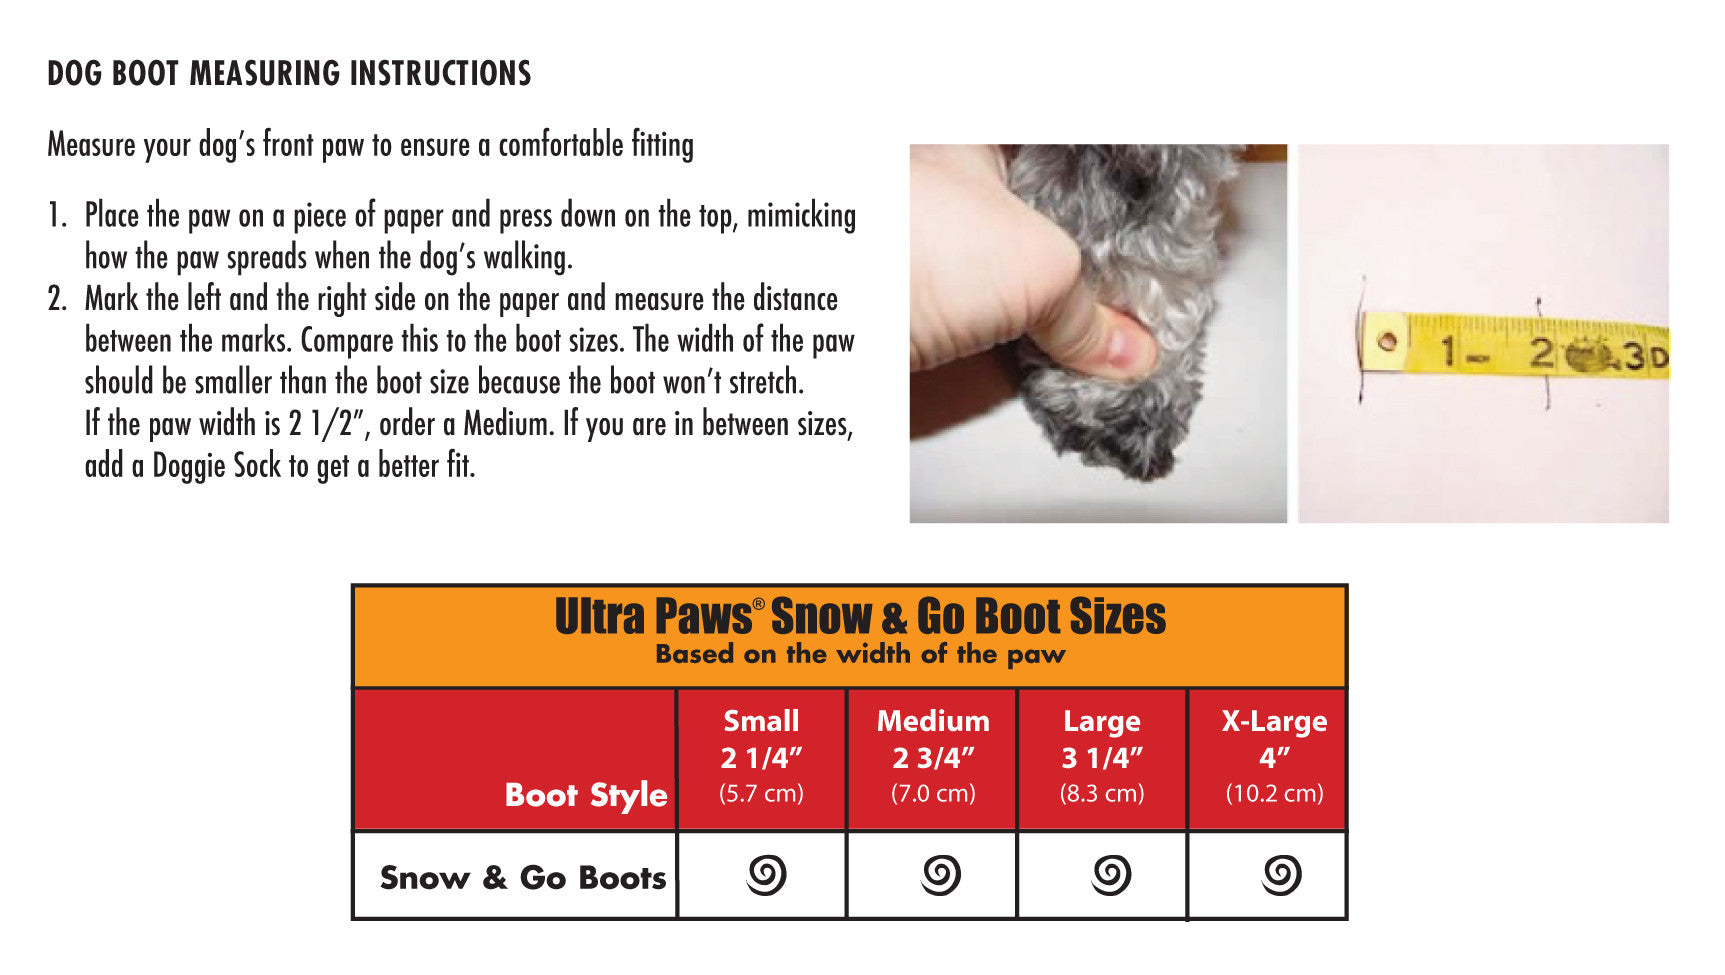 Ultra Paws Snow & Go Boots (formerly Endurance)(set of 4)